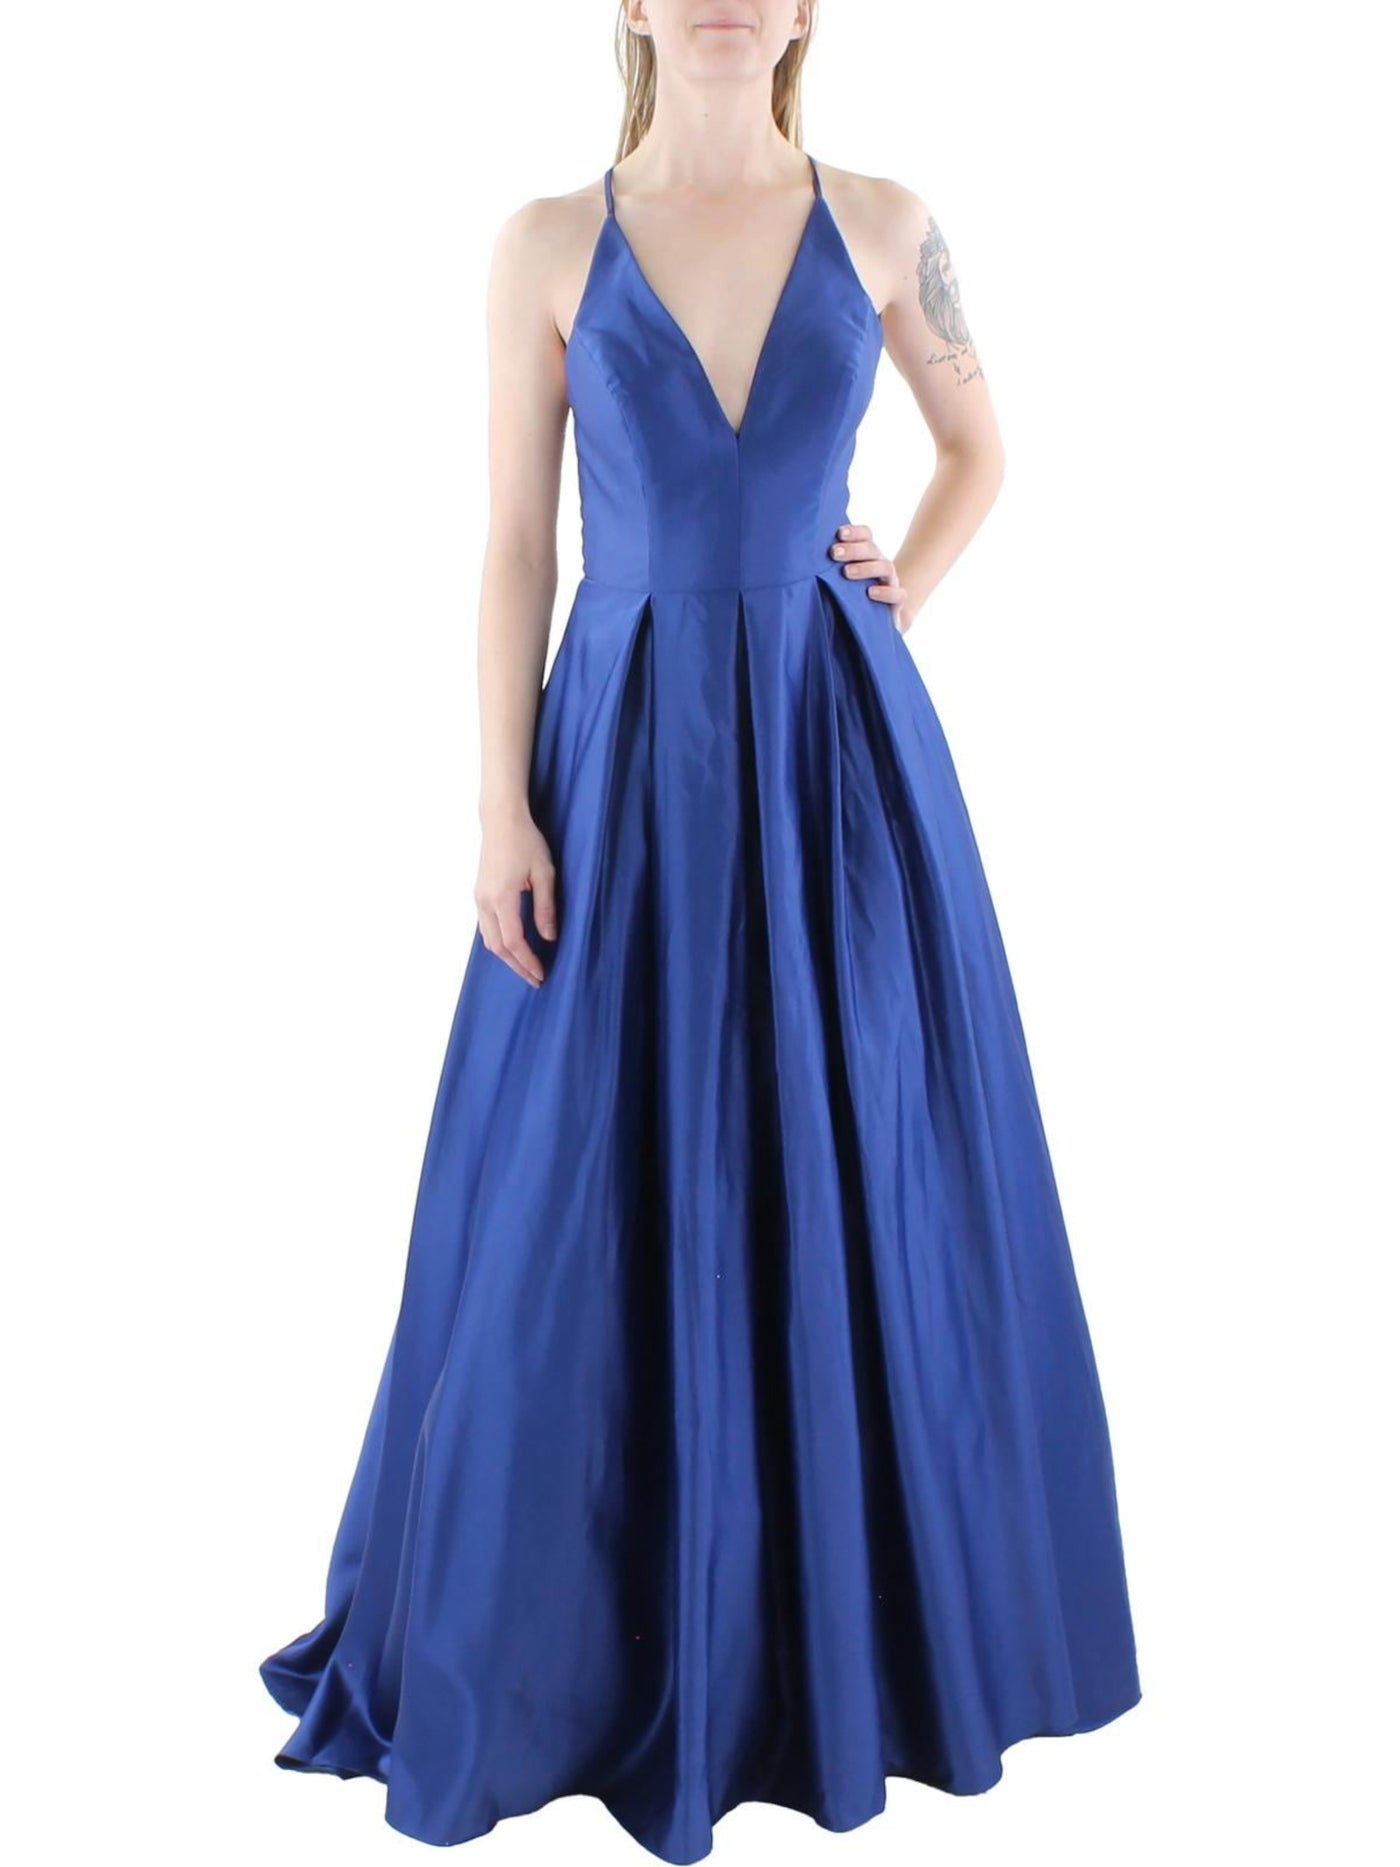 BLONDIE NITES Womens Blue Zippered Pocketed Illusion Strappy Back Bodice Spaghetti Strap V Neck Full-Length Formal Gown Dress Juniors 9